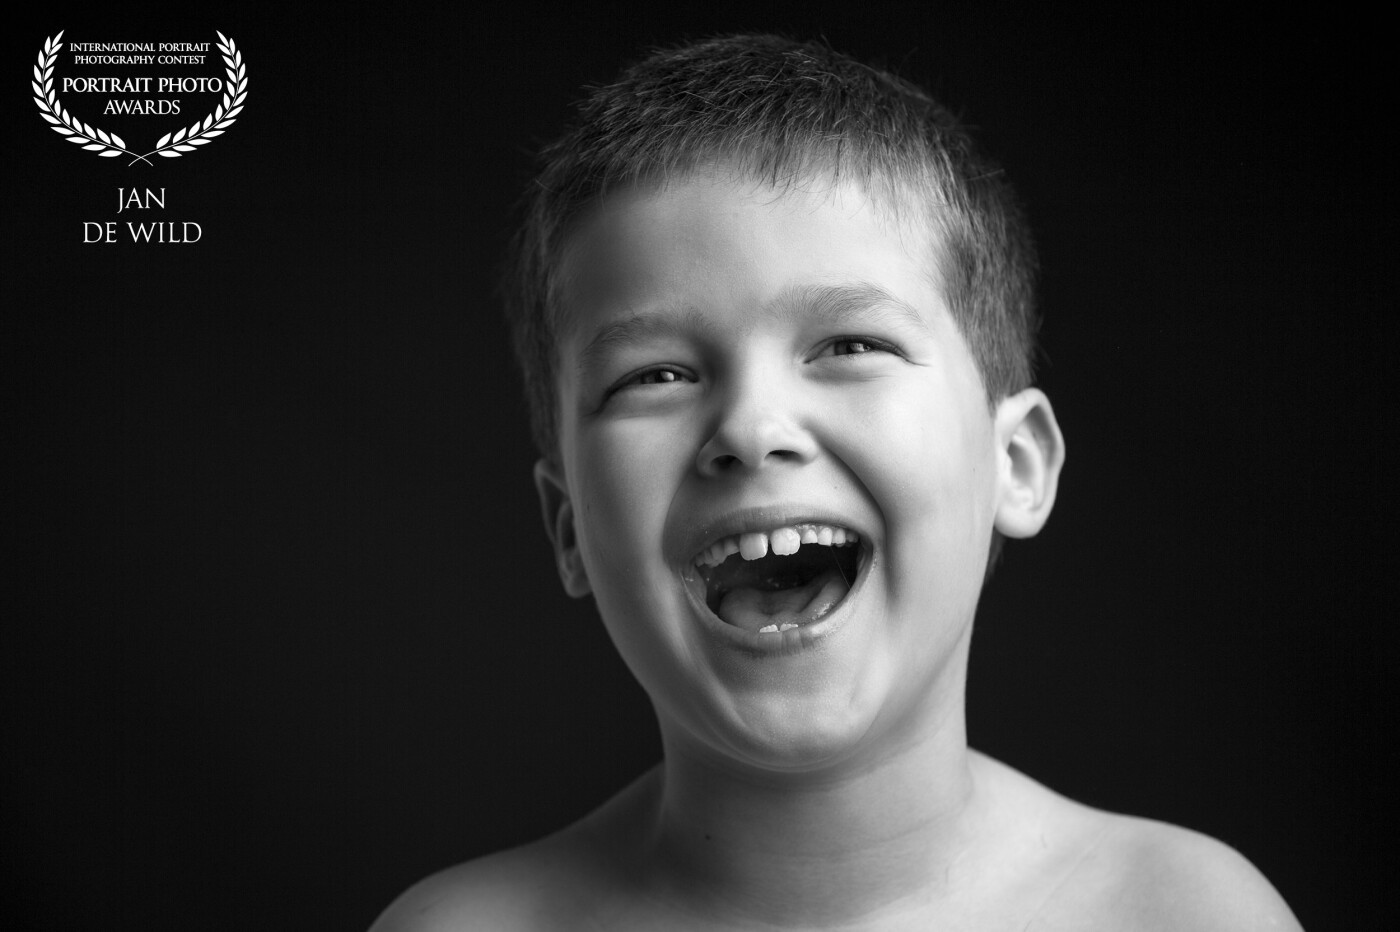 My youngest son can be found in my studio very often. This time I made him laugh so hard that he farted :-) ... So funny!<br />
This particular session was intended as a serious one...